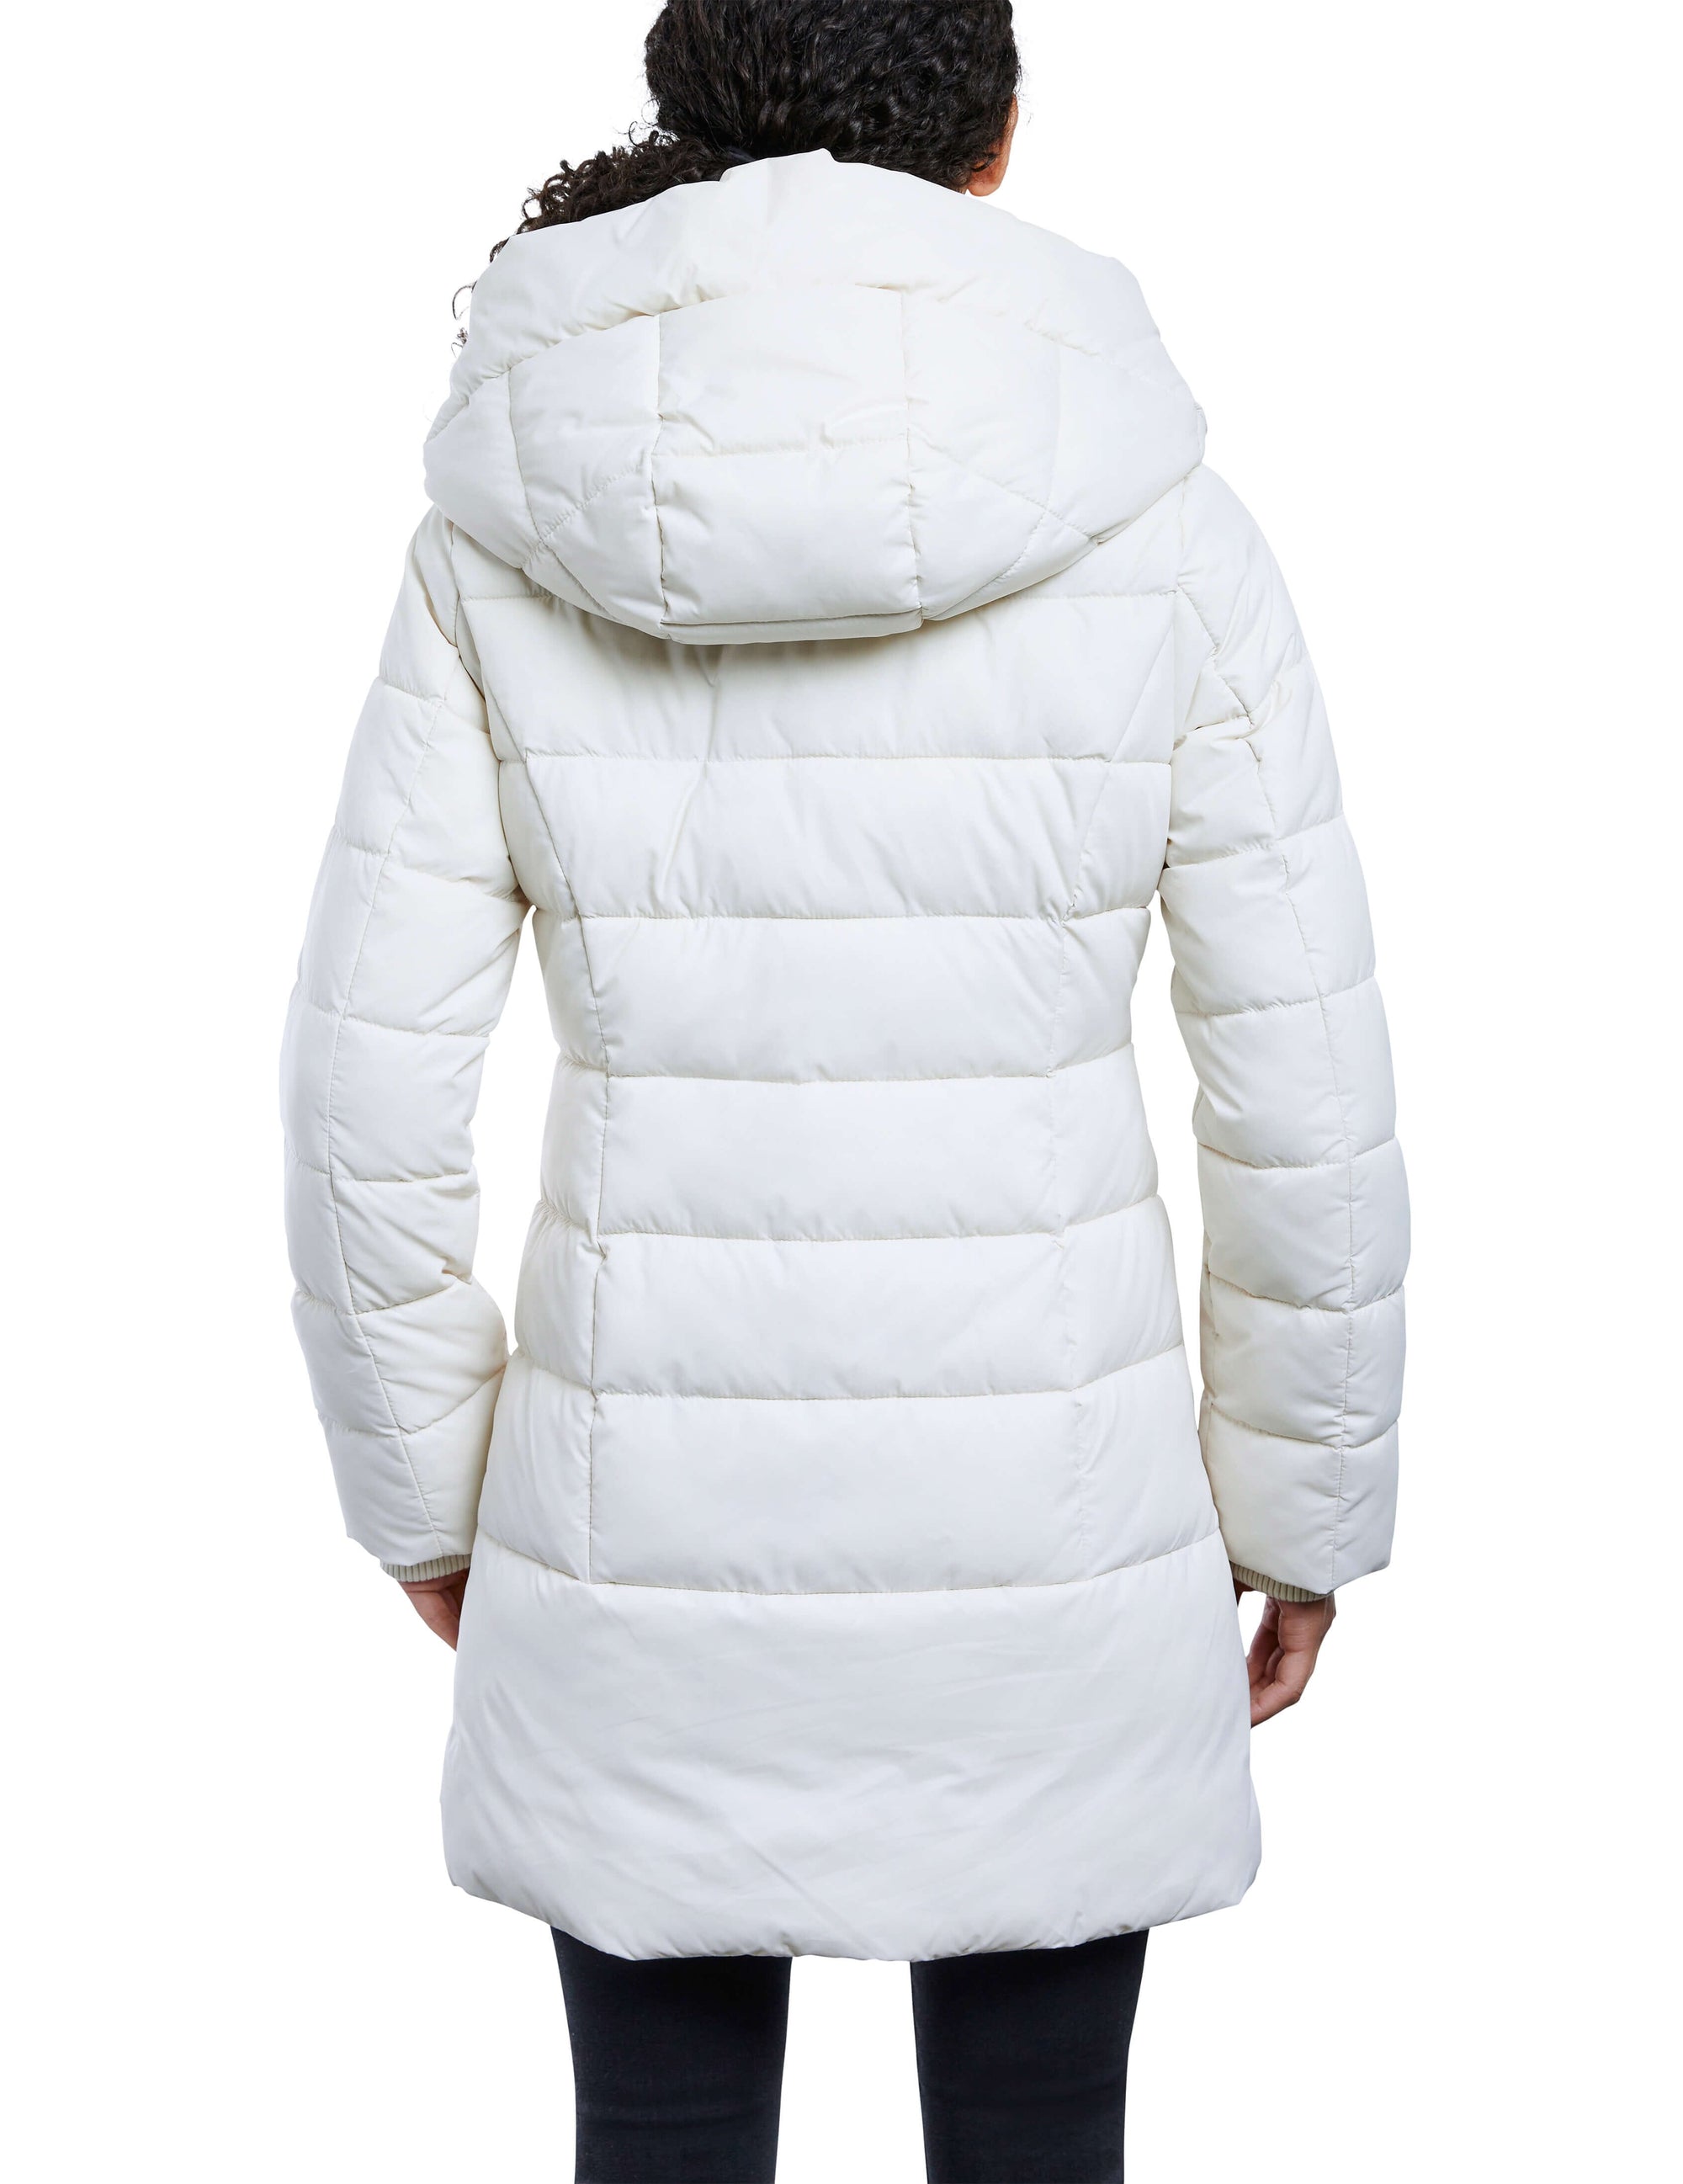 Anne Klein Unbleach Cotton Consider It Snap Front Puffer Jacket - Clearance